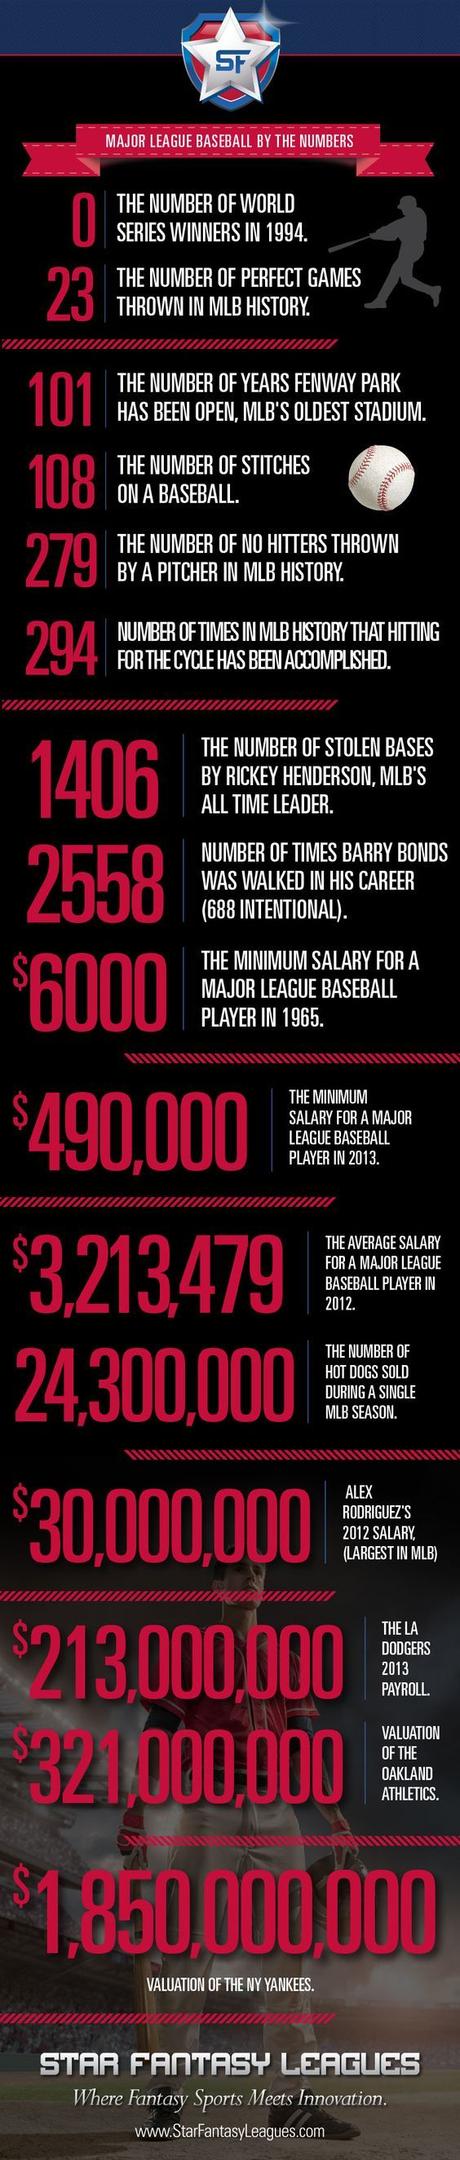 Infographic: Major League Baseball by the numbers